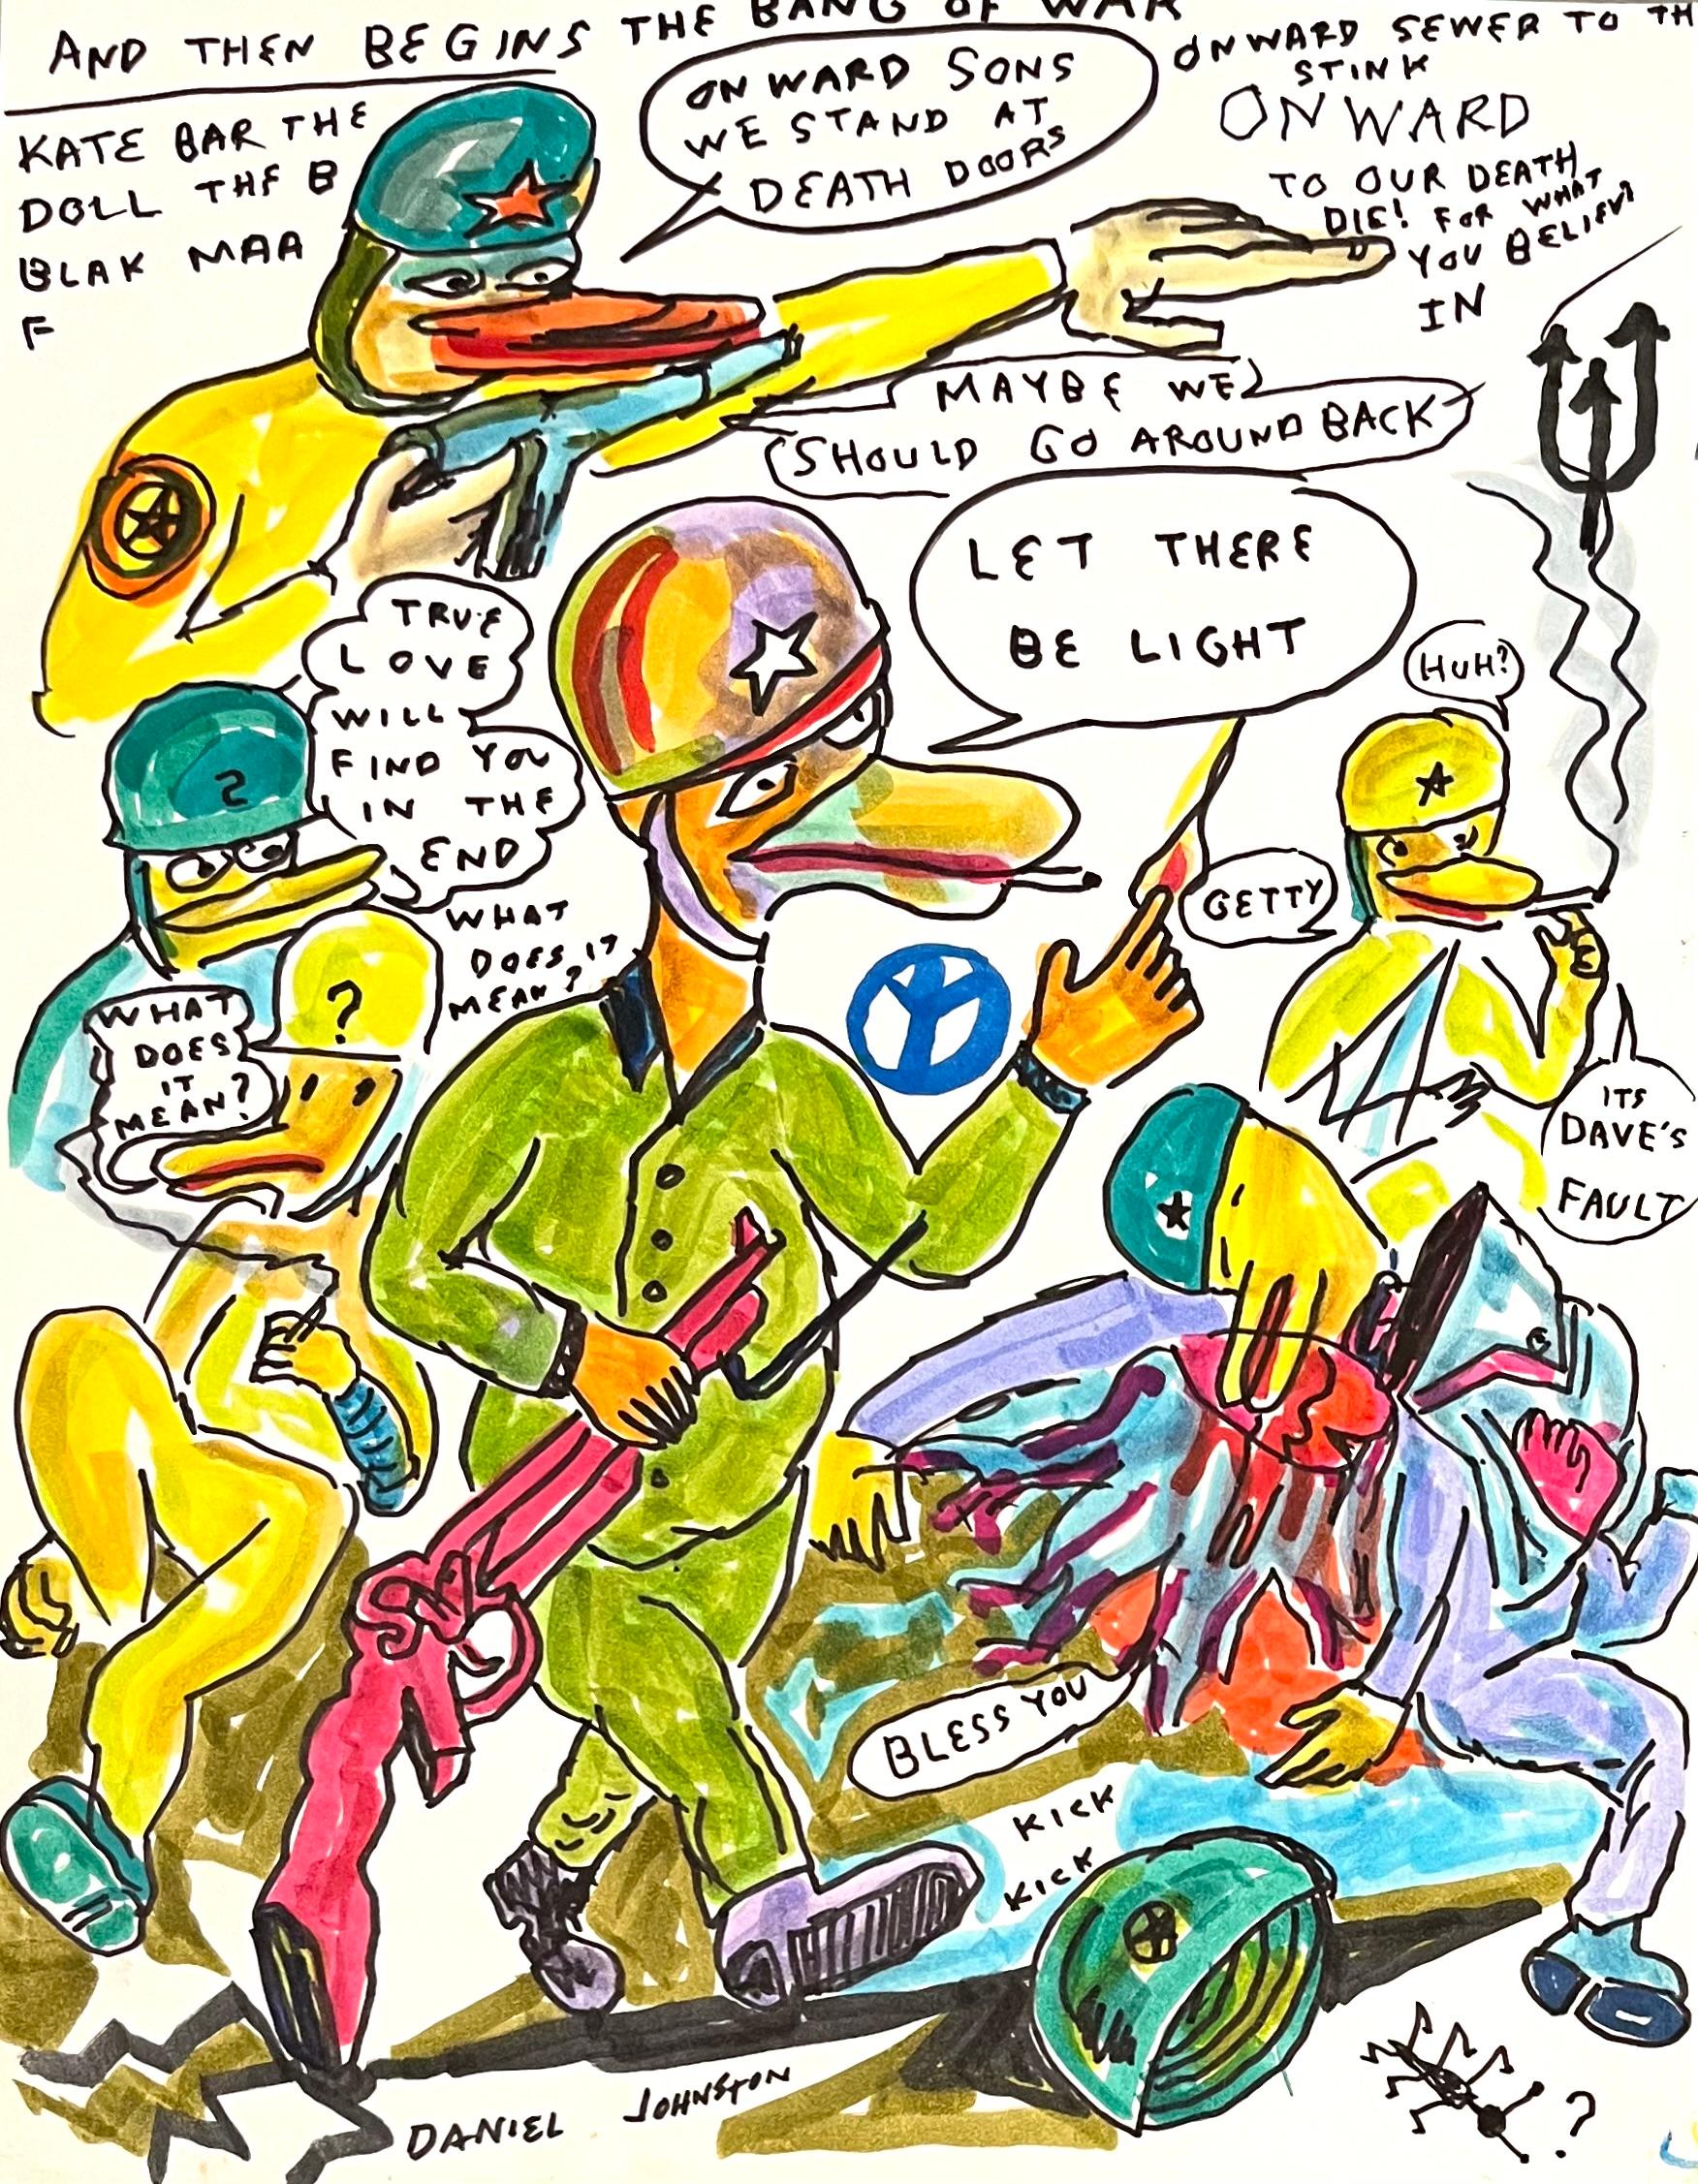 Daniel Johnston Animal Art - And Then Begins the Bang of War, Colorful Figurative Drawing, Duck Wars Series